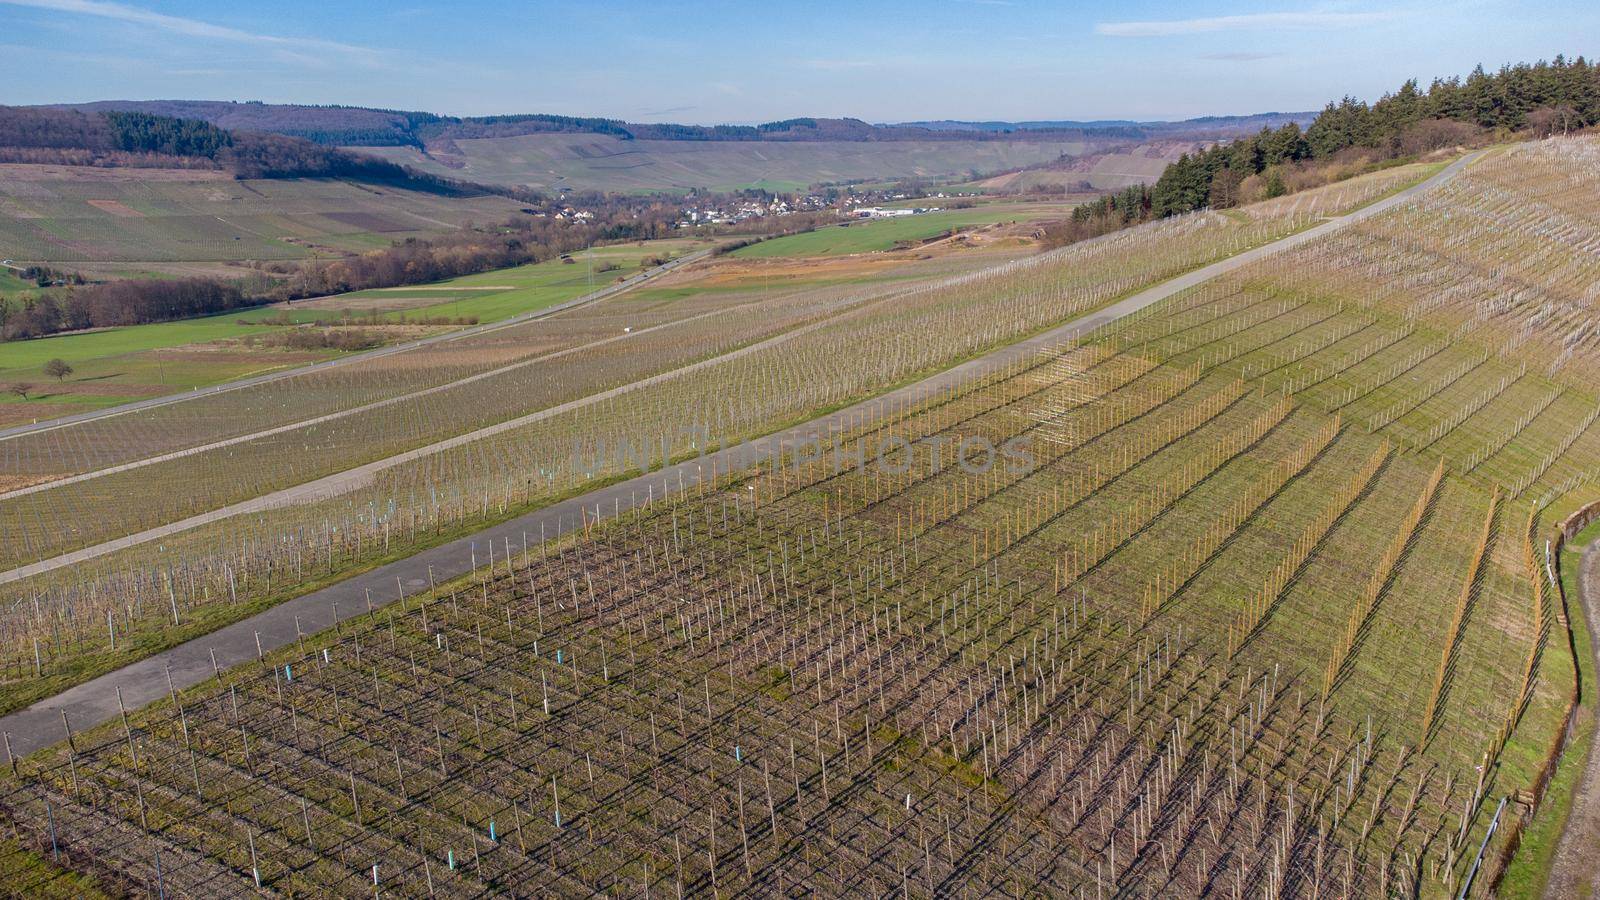 Aerial view of the river Moselle valley with vineyards and the village Osann-Monzel in the background